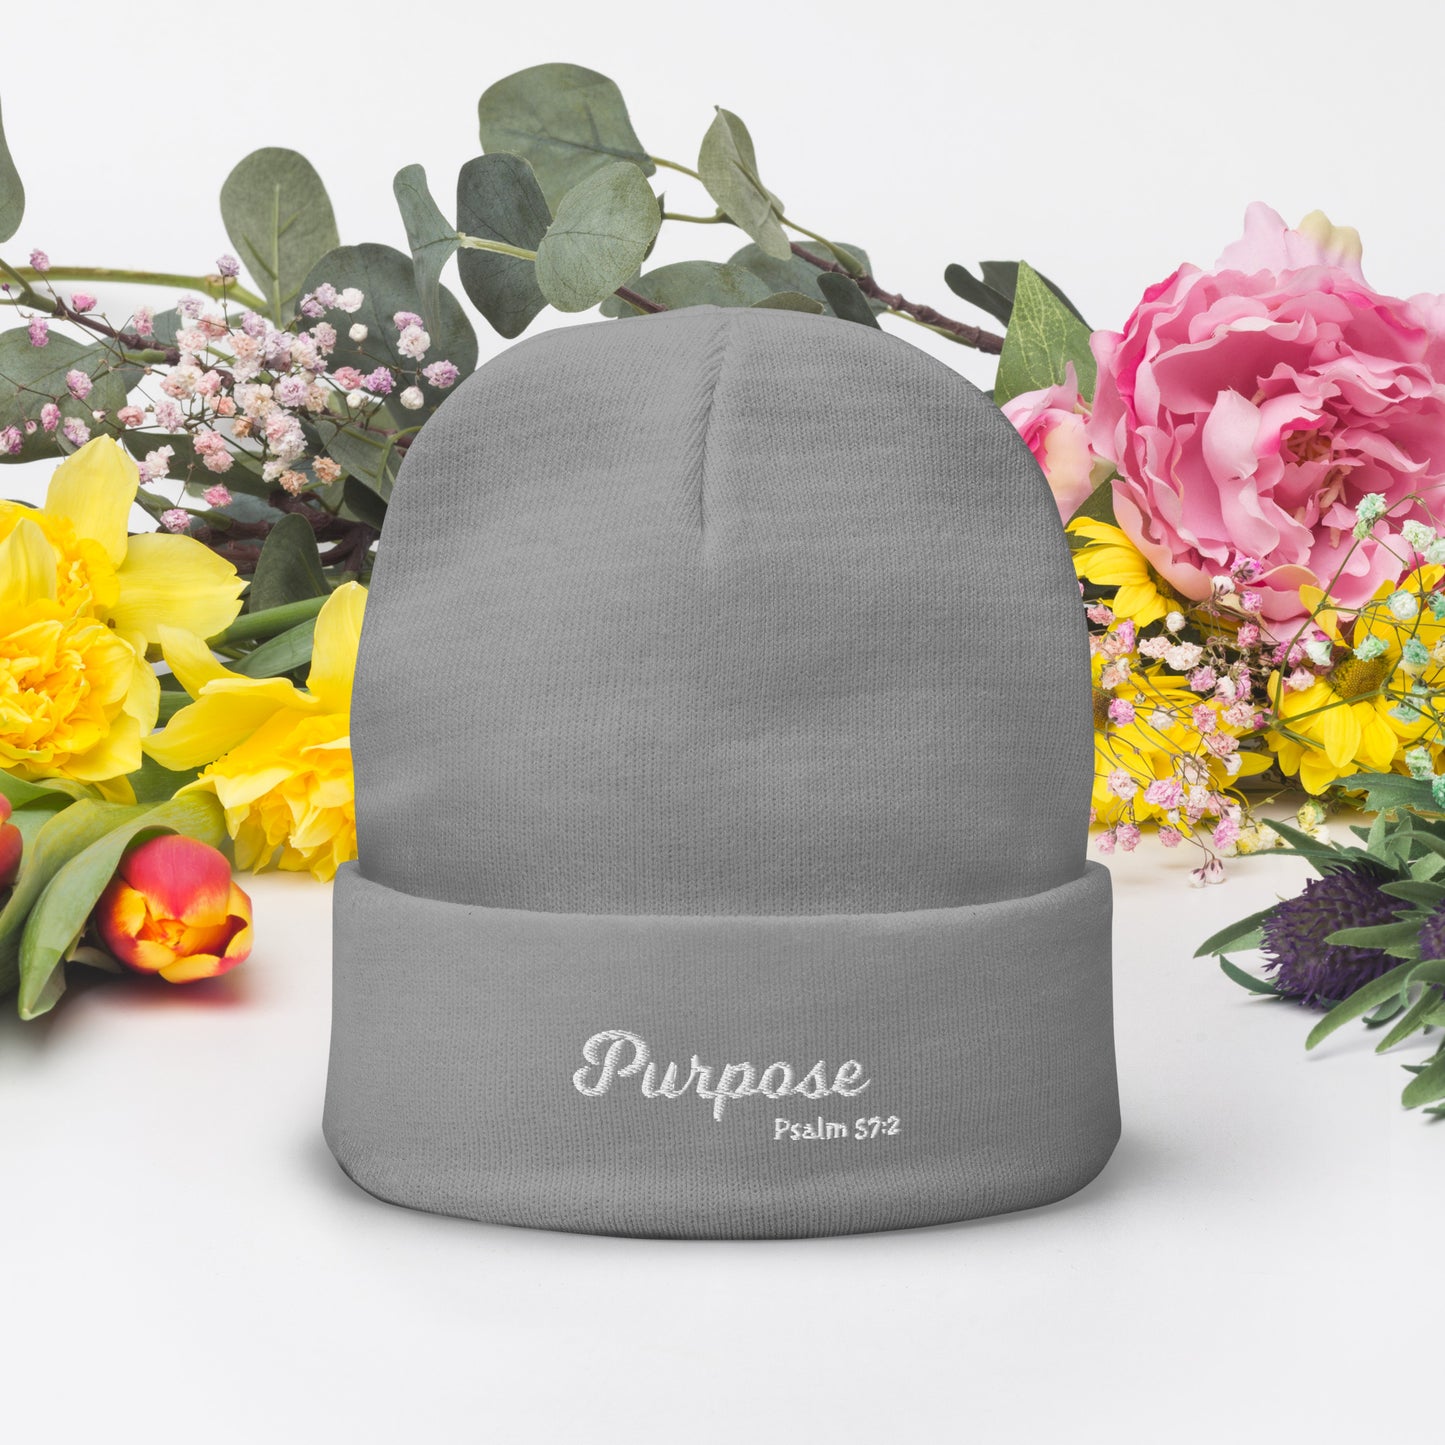 Purpose Embroidered Beanie